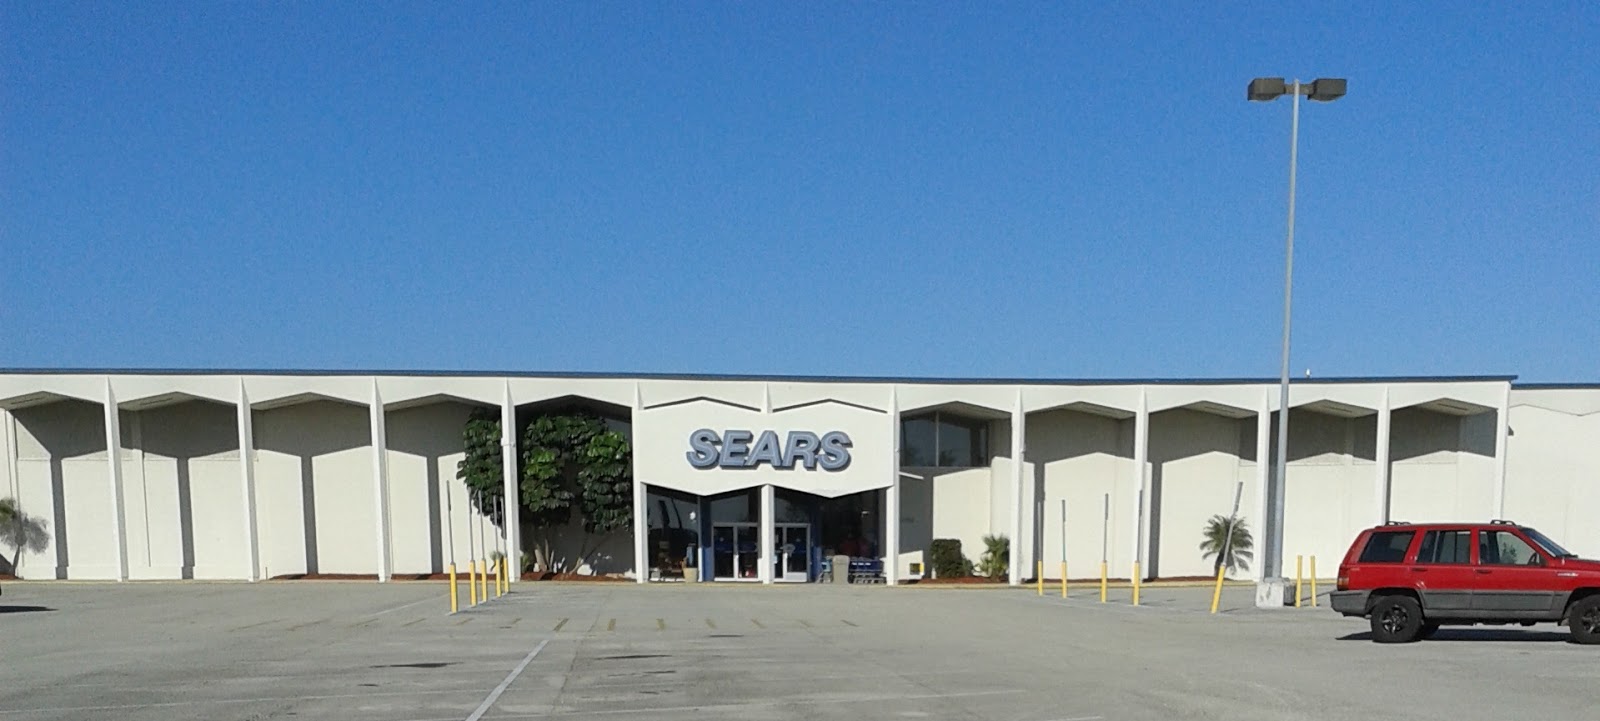 My Florida Retail Blog: Sears #2245 - Melbourne, FL - Back in the Good Old Days